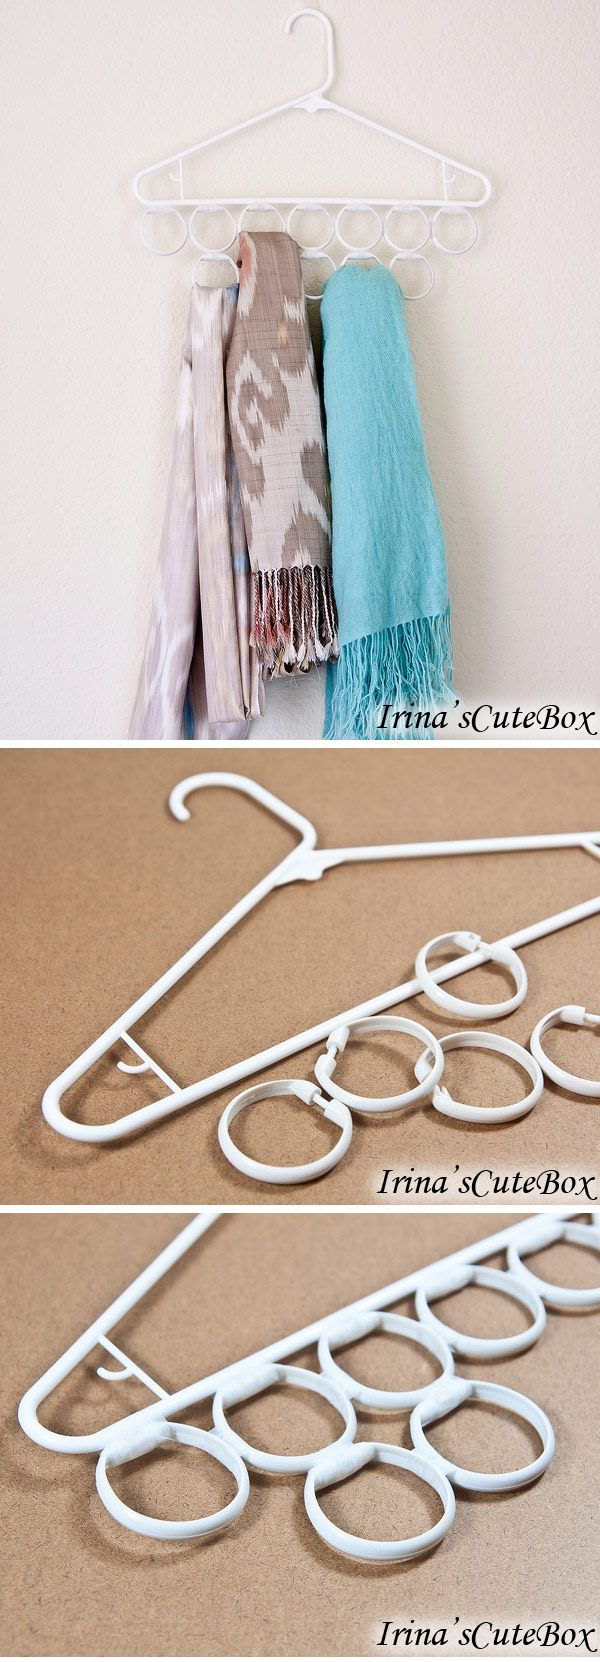 Inexpensive Scarves Holder Made out of a Hanger and Shower Curtain Rings